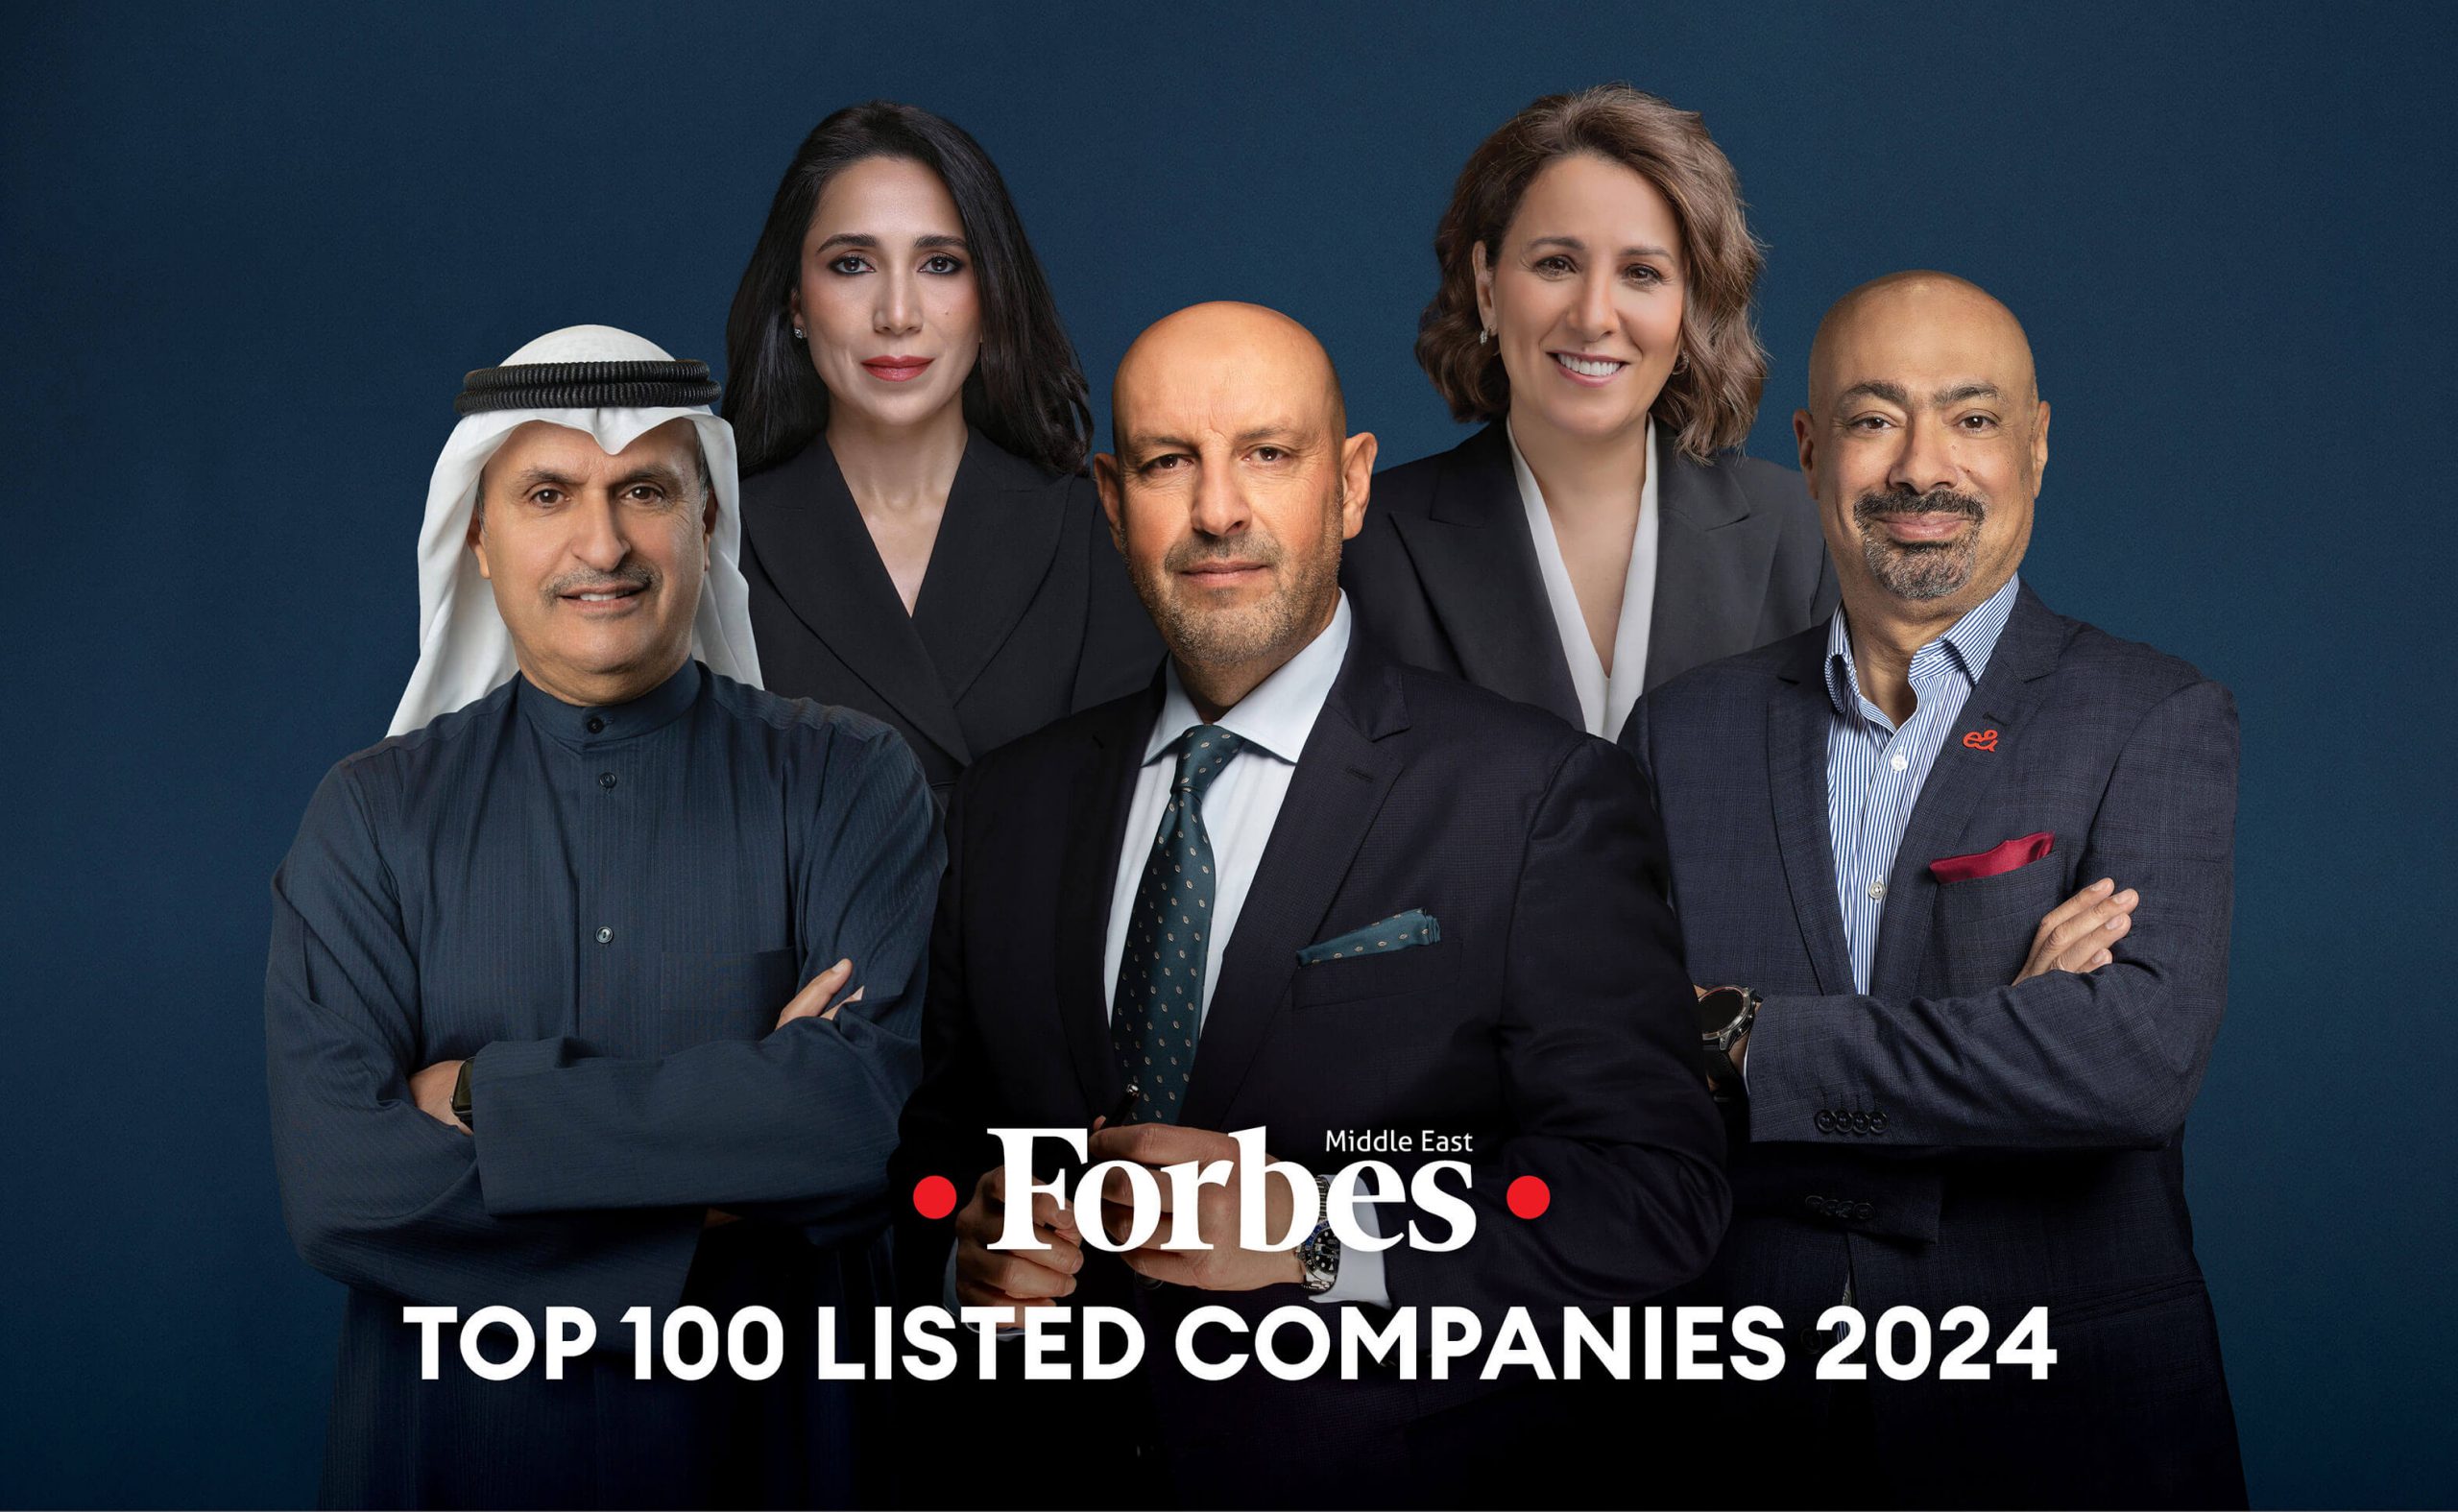 Top 100 Listed Companies 2024